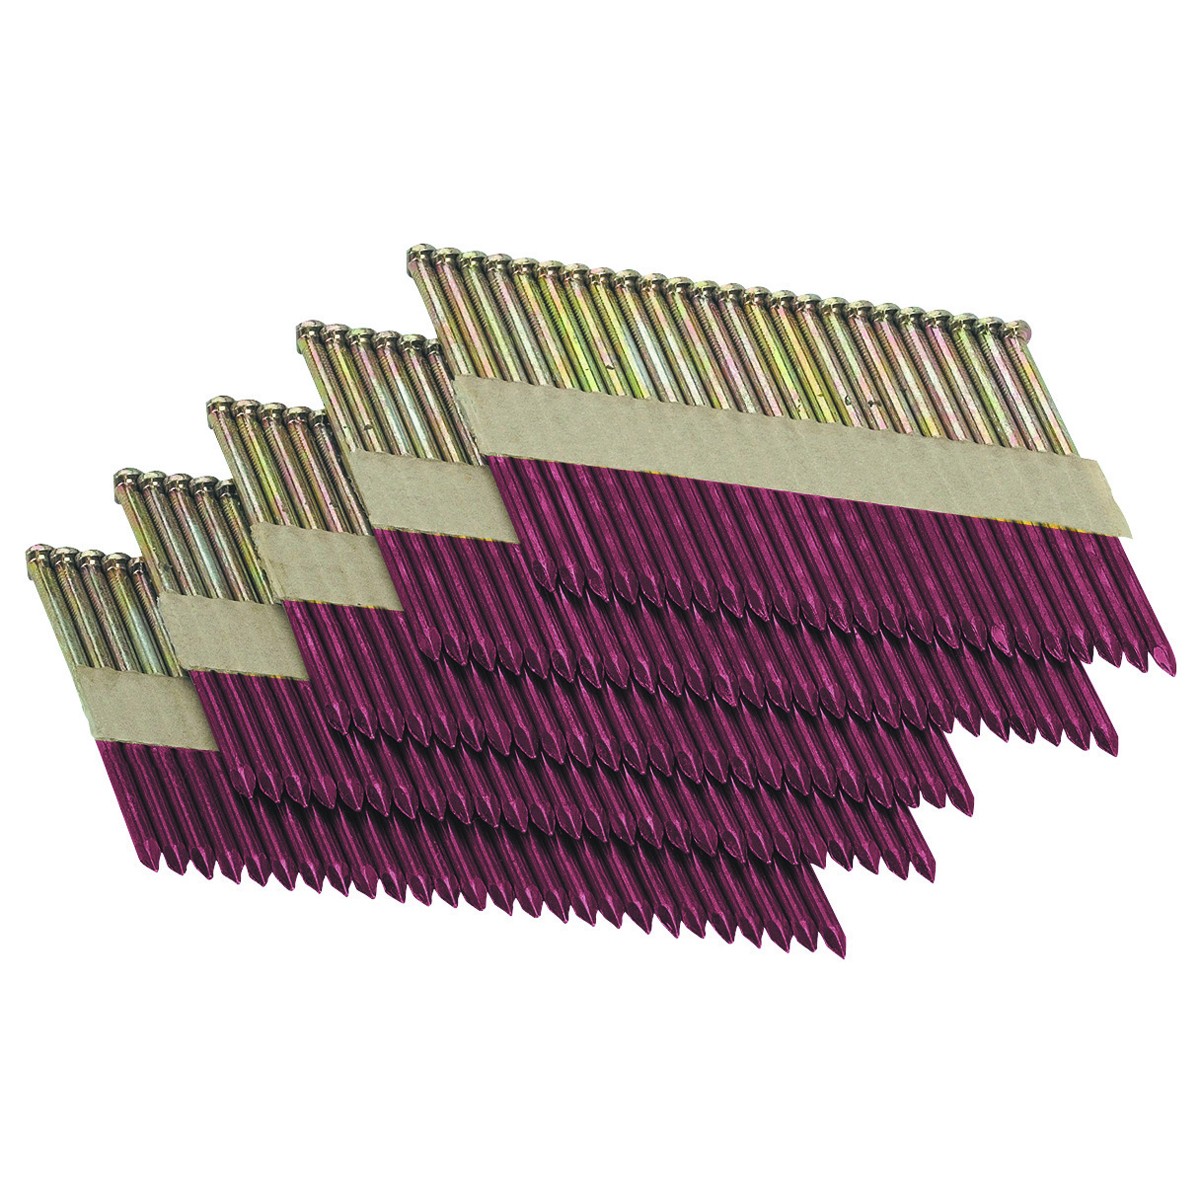 28 2-1/2 in. 10 Gauge Galvanized Smooth Shank Nails 2000 Pc